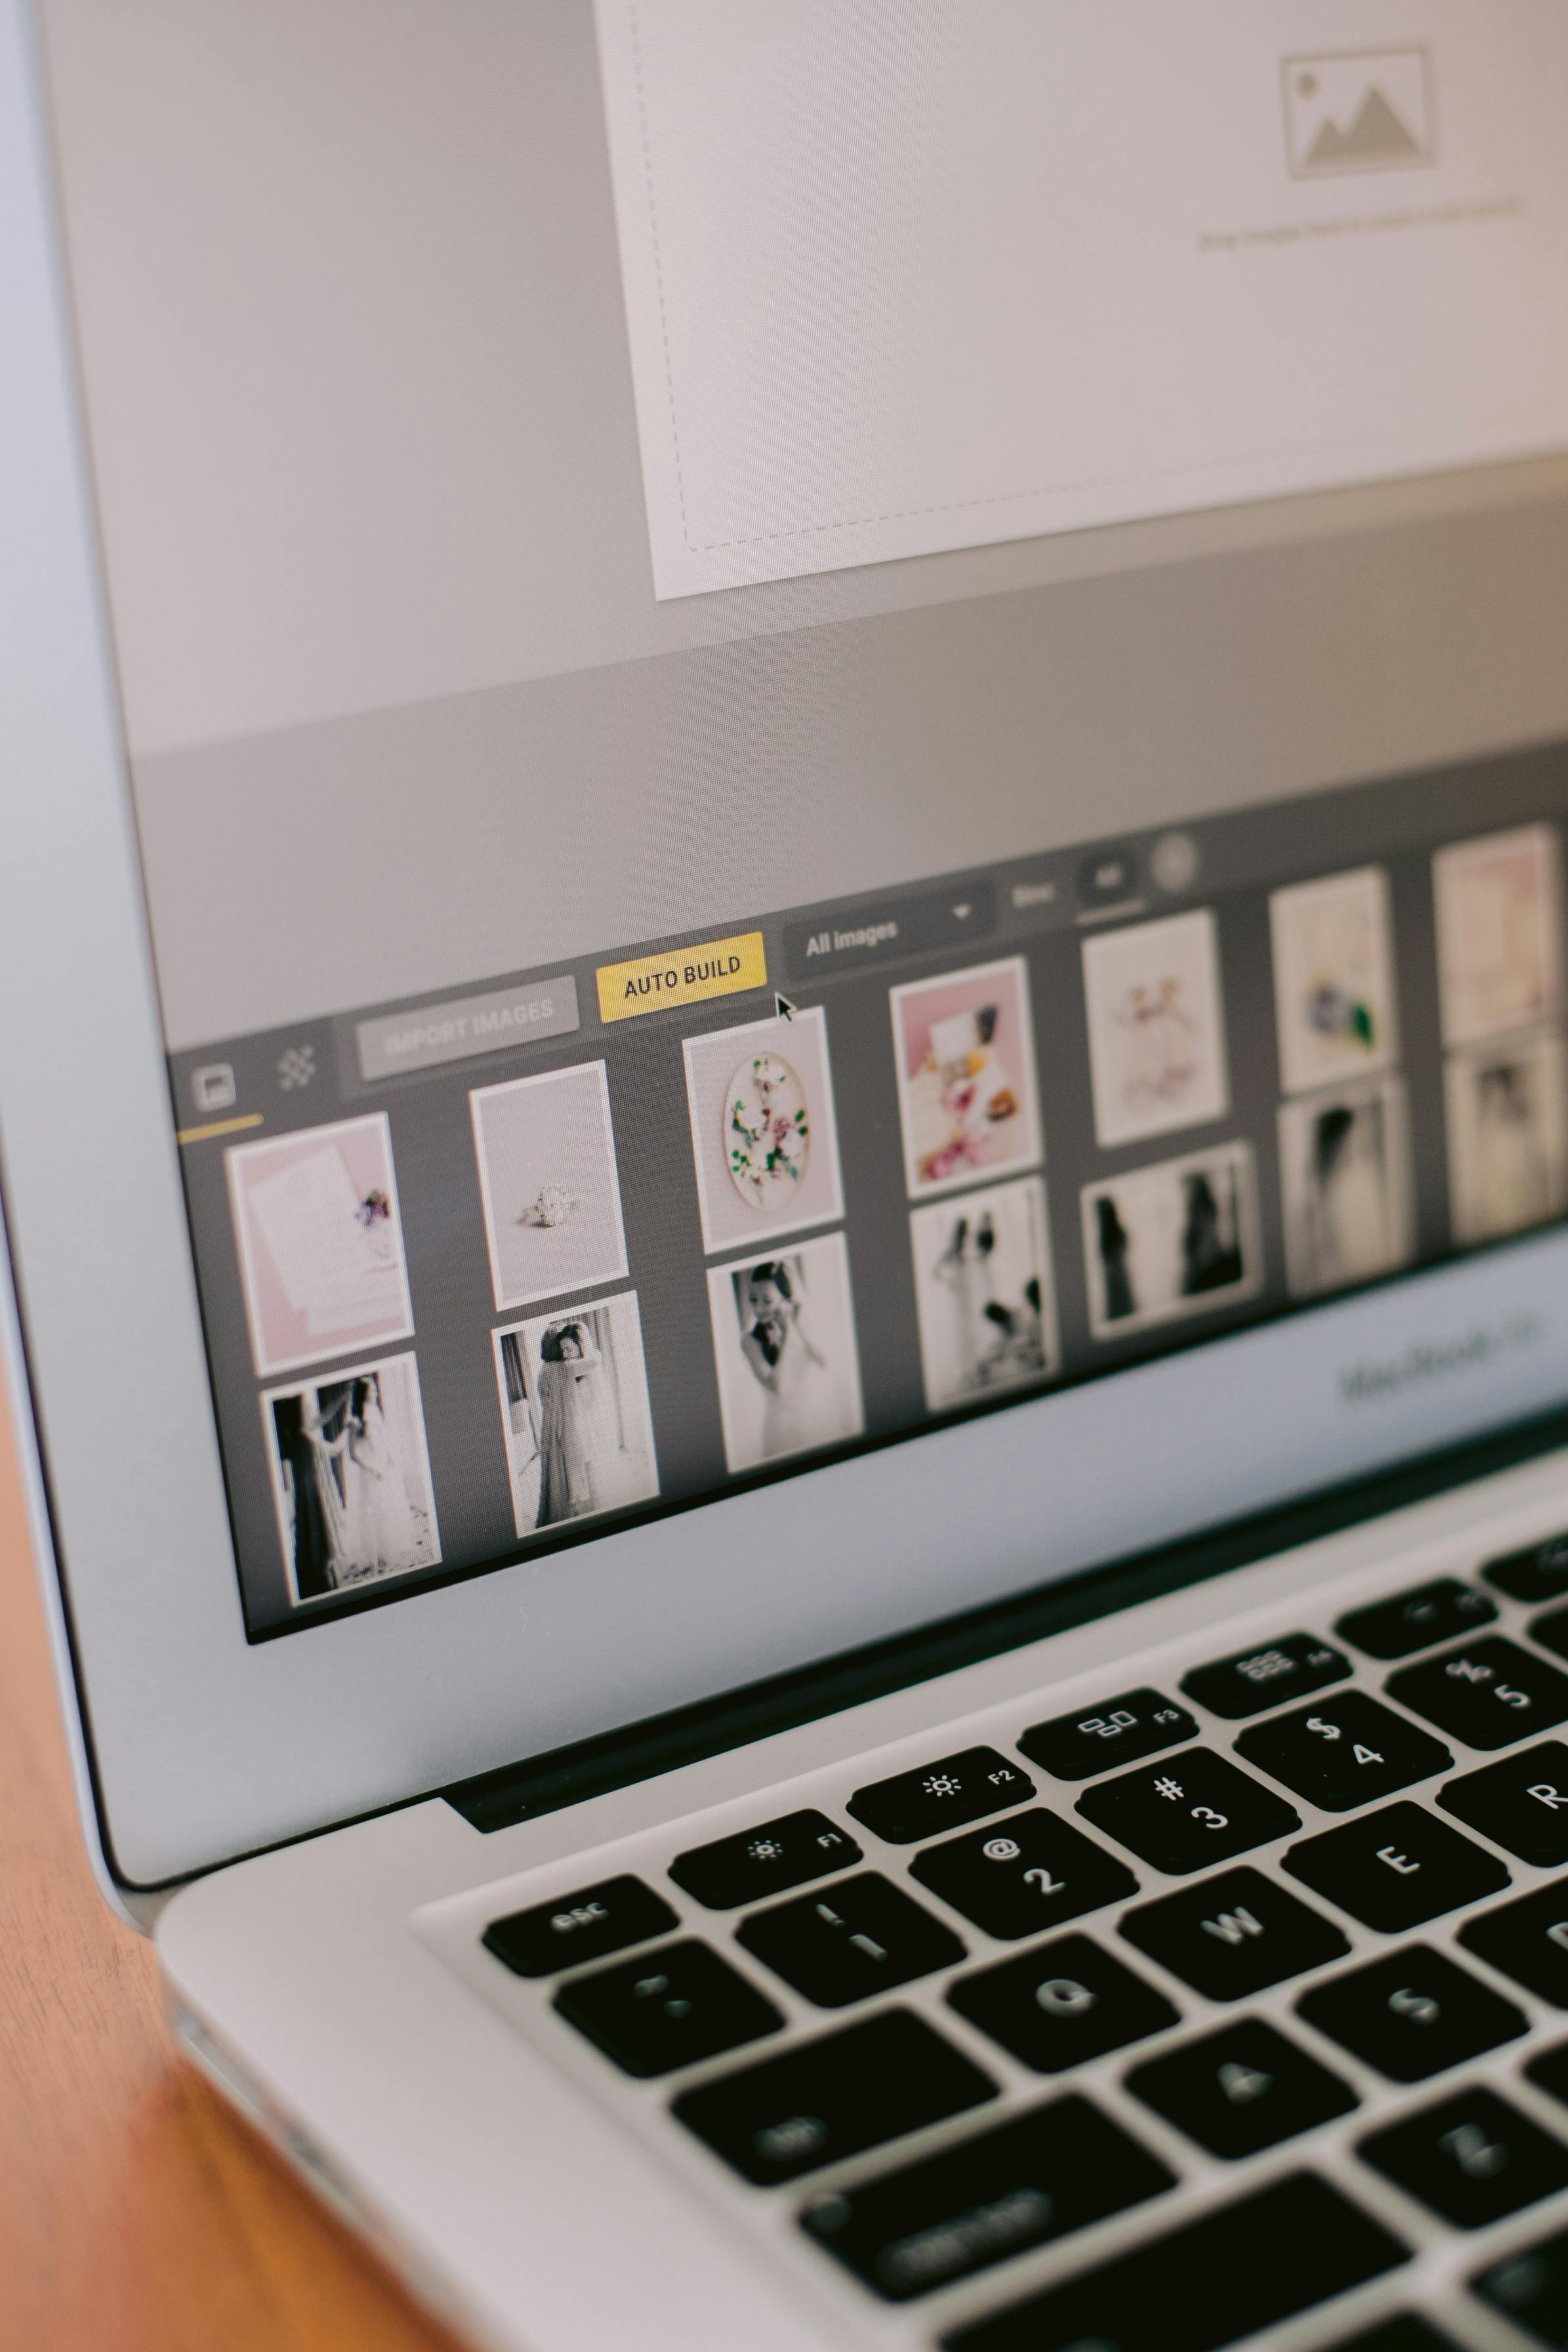 SmartAlbums Auto Build allows photographers to design a photo album for their clients quickly and easily